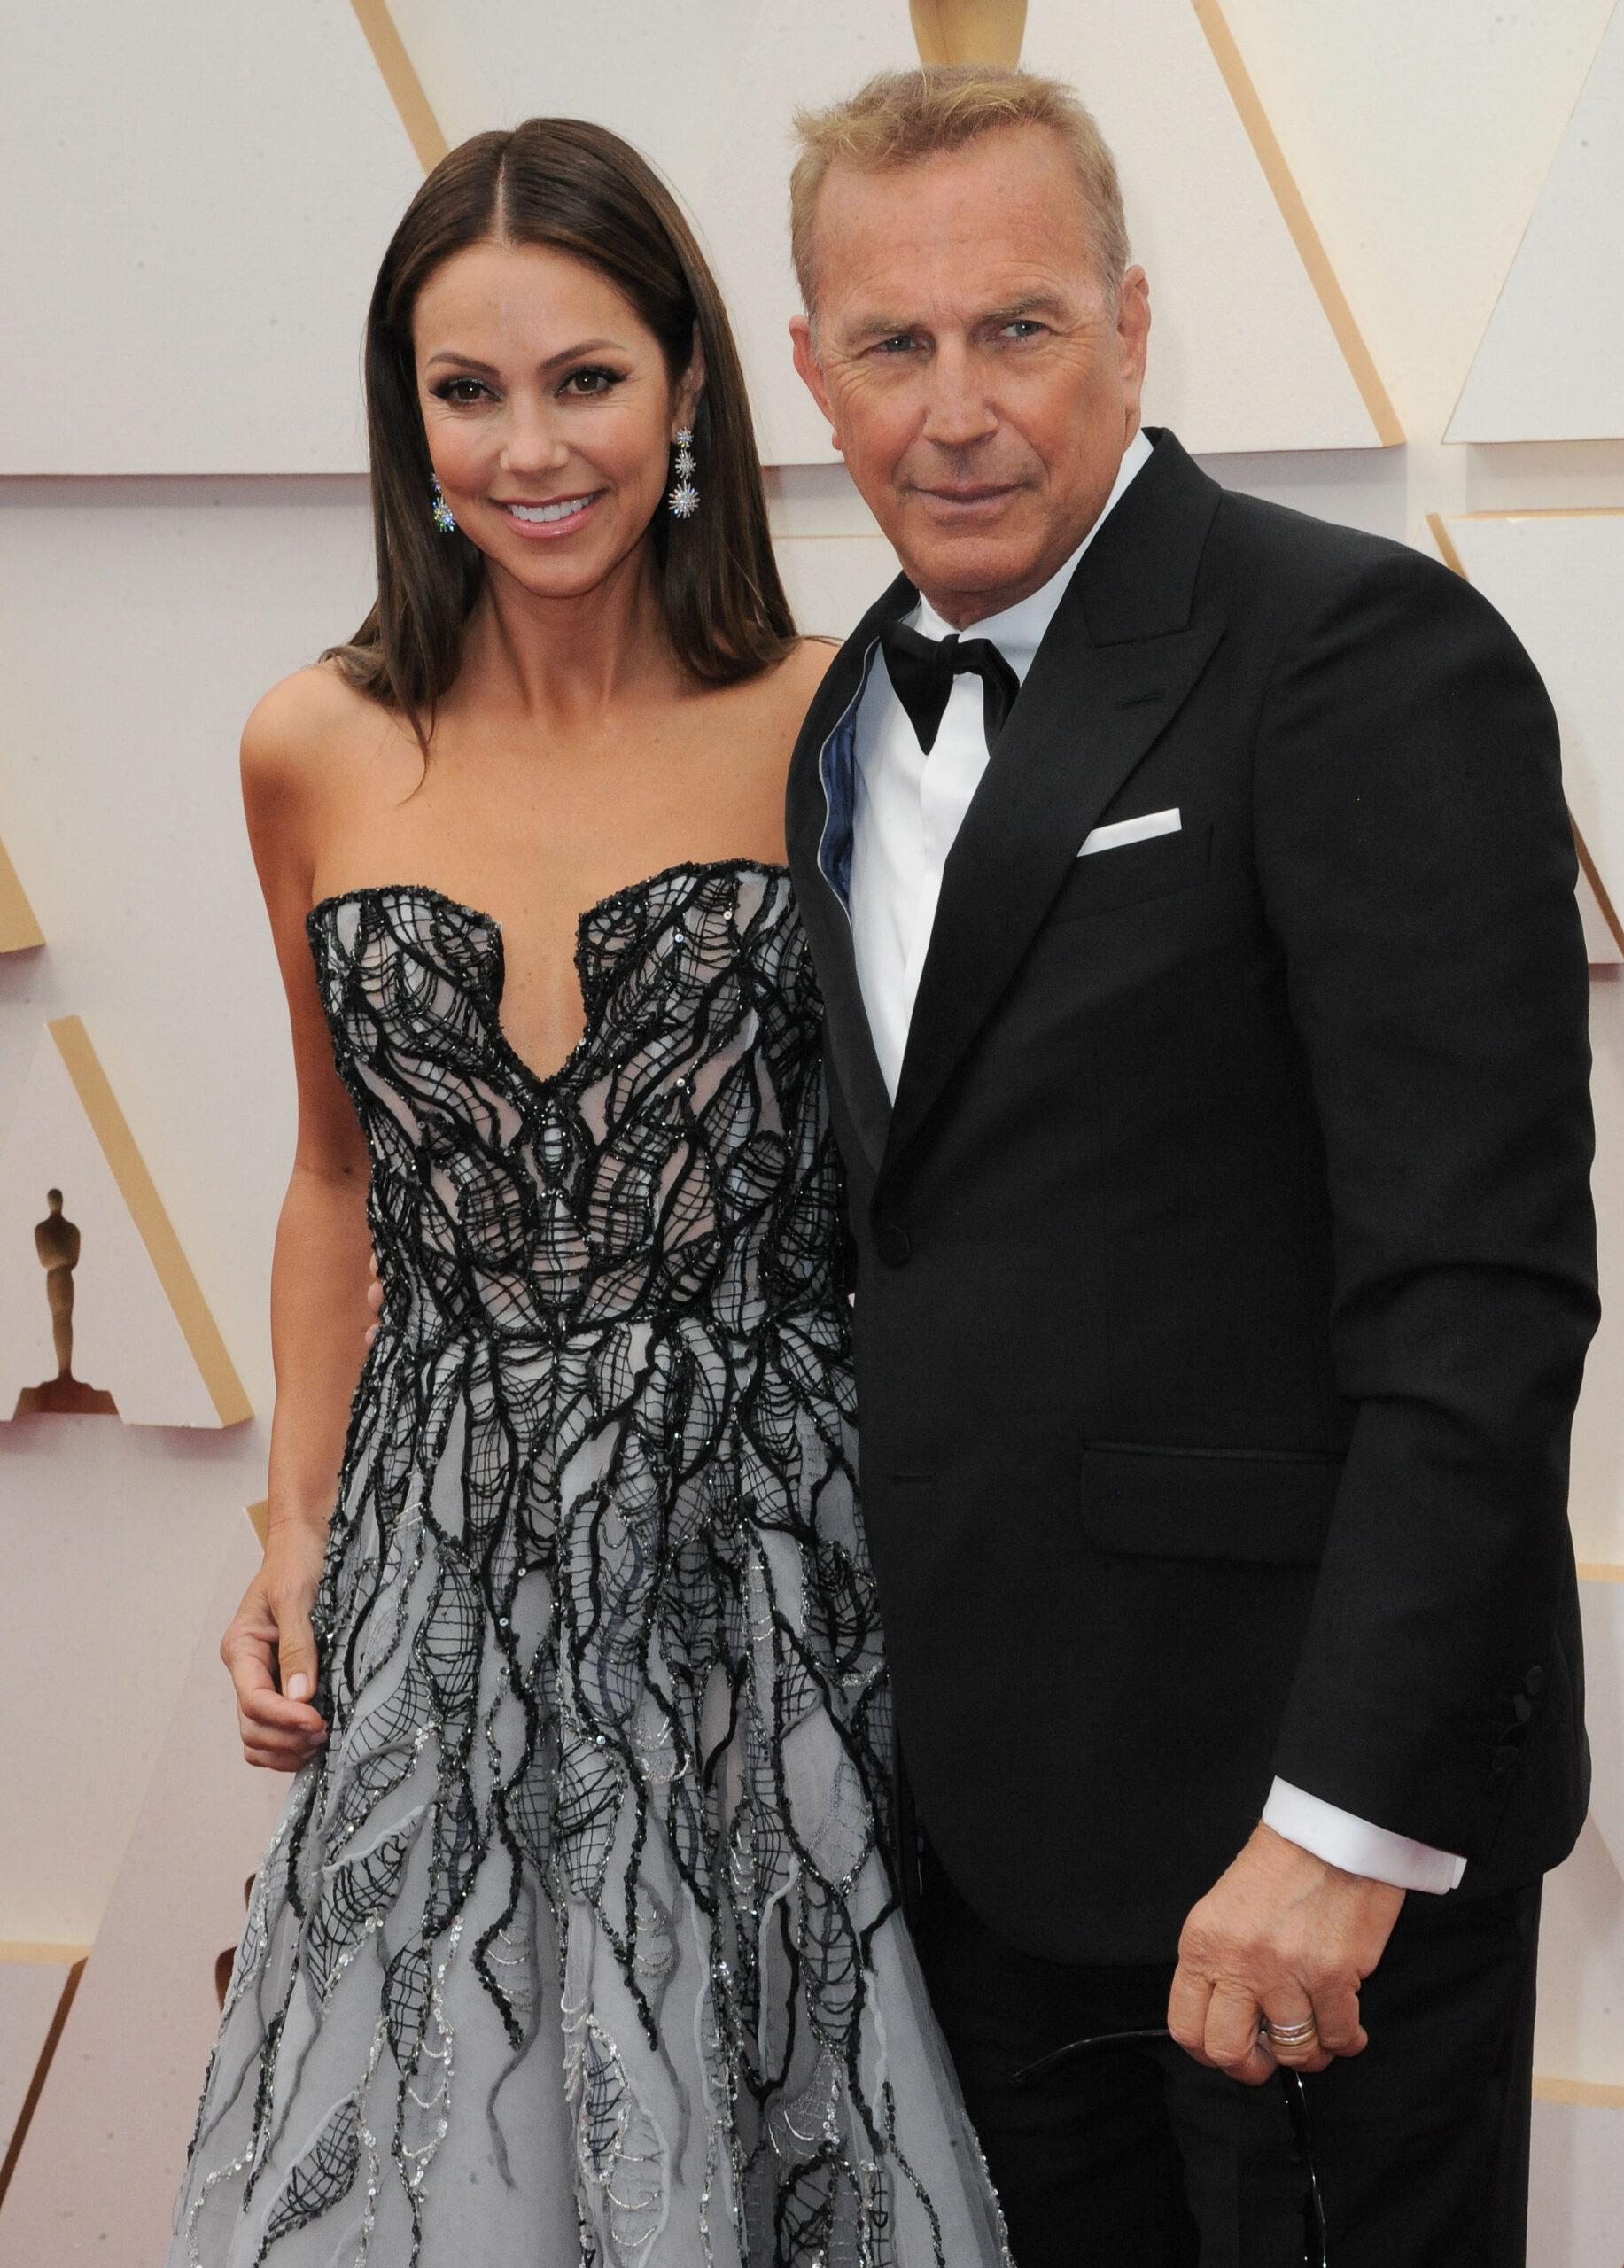 Kevin Costner and Christine Baumgartner Attending The 94th Annual Academy Awards - Arrivals in Los angeles